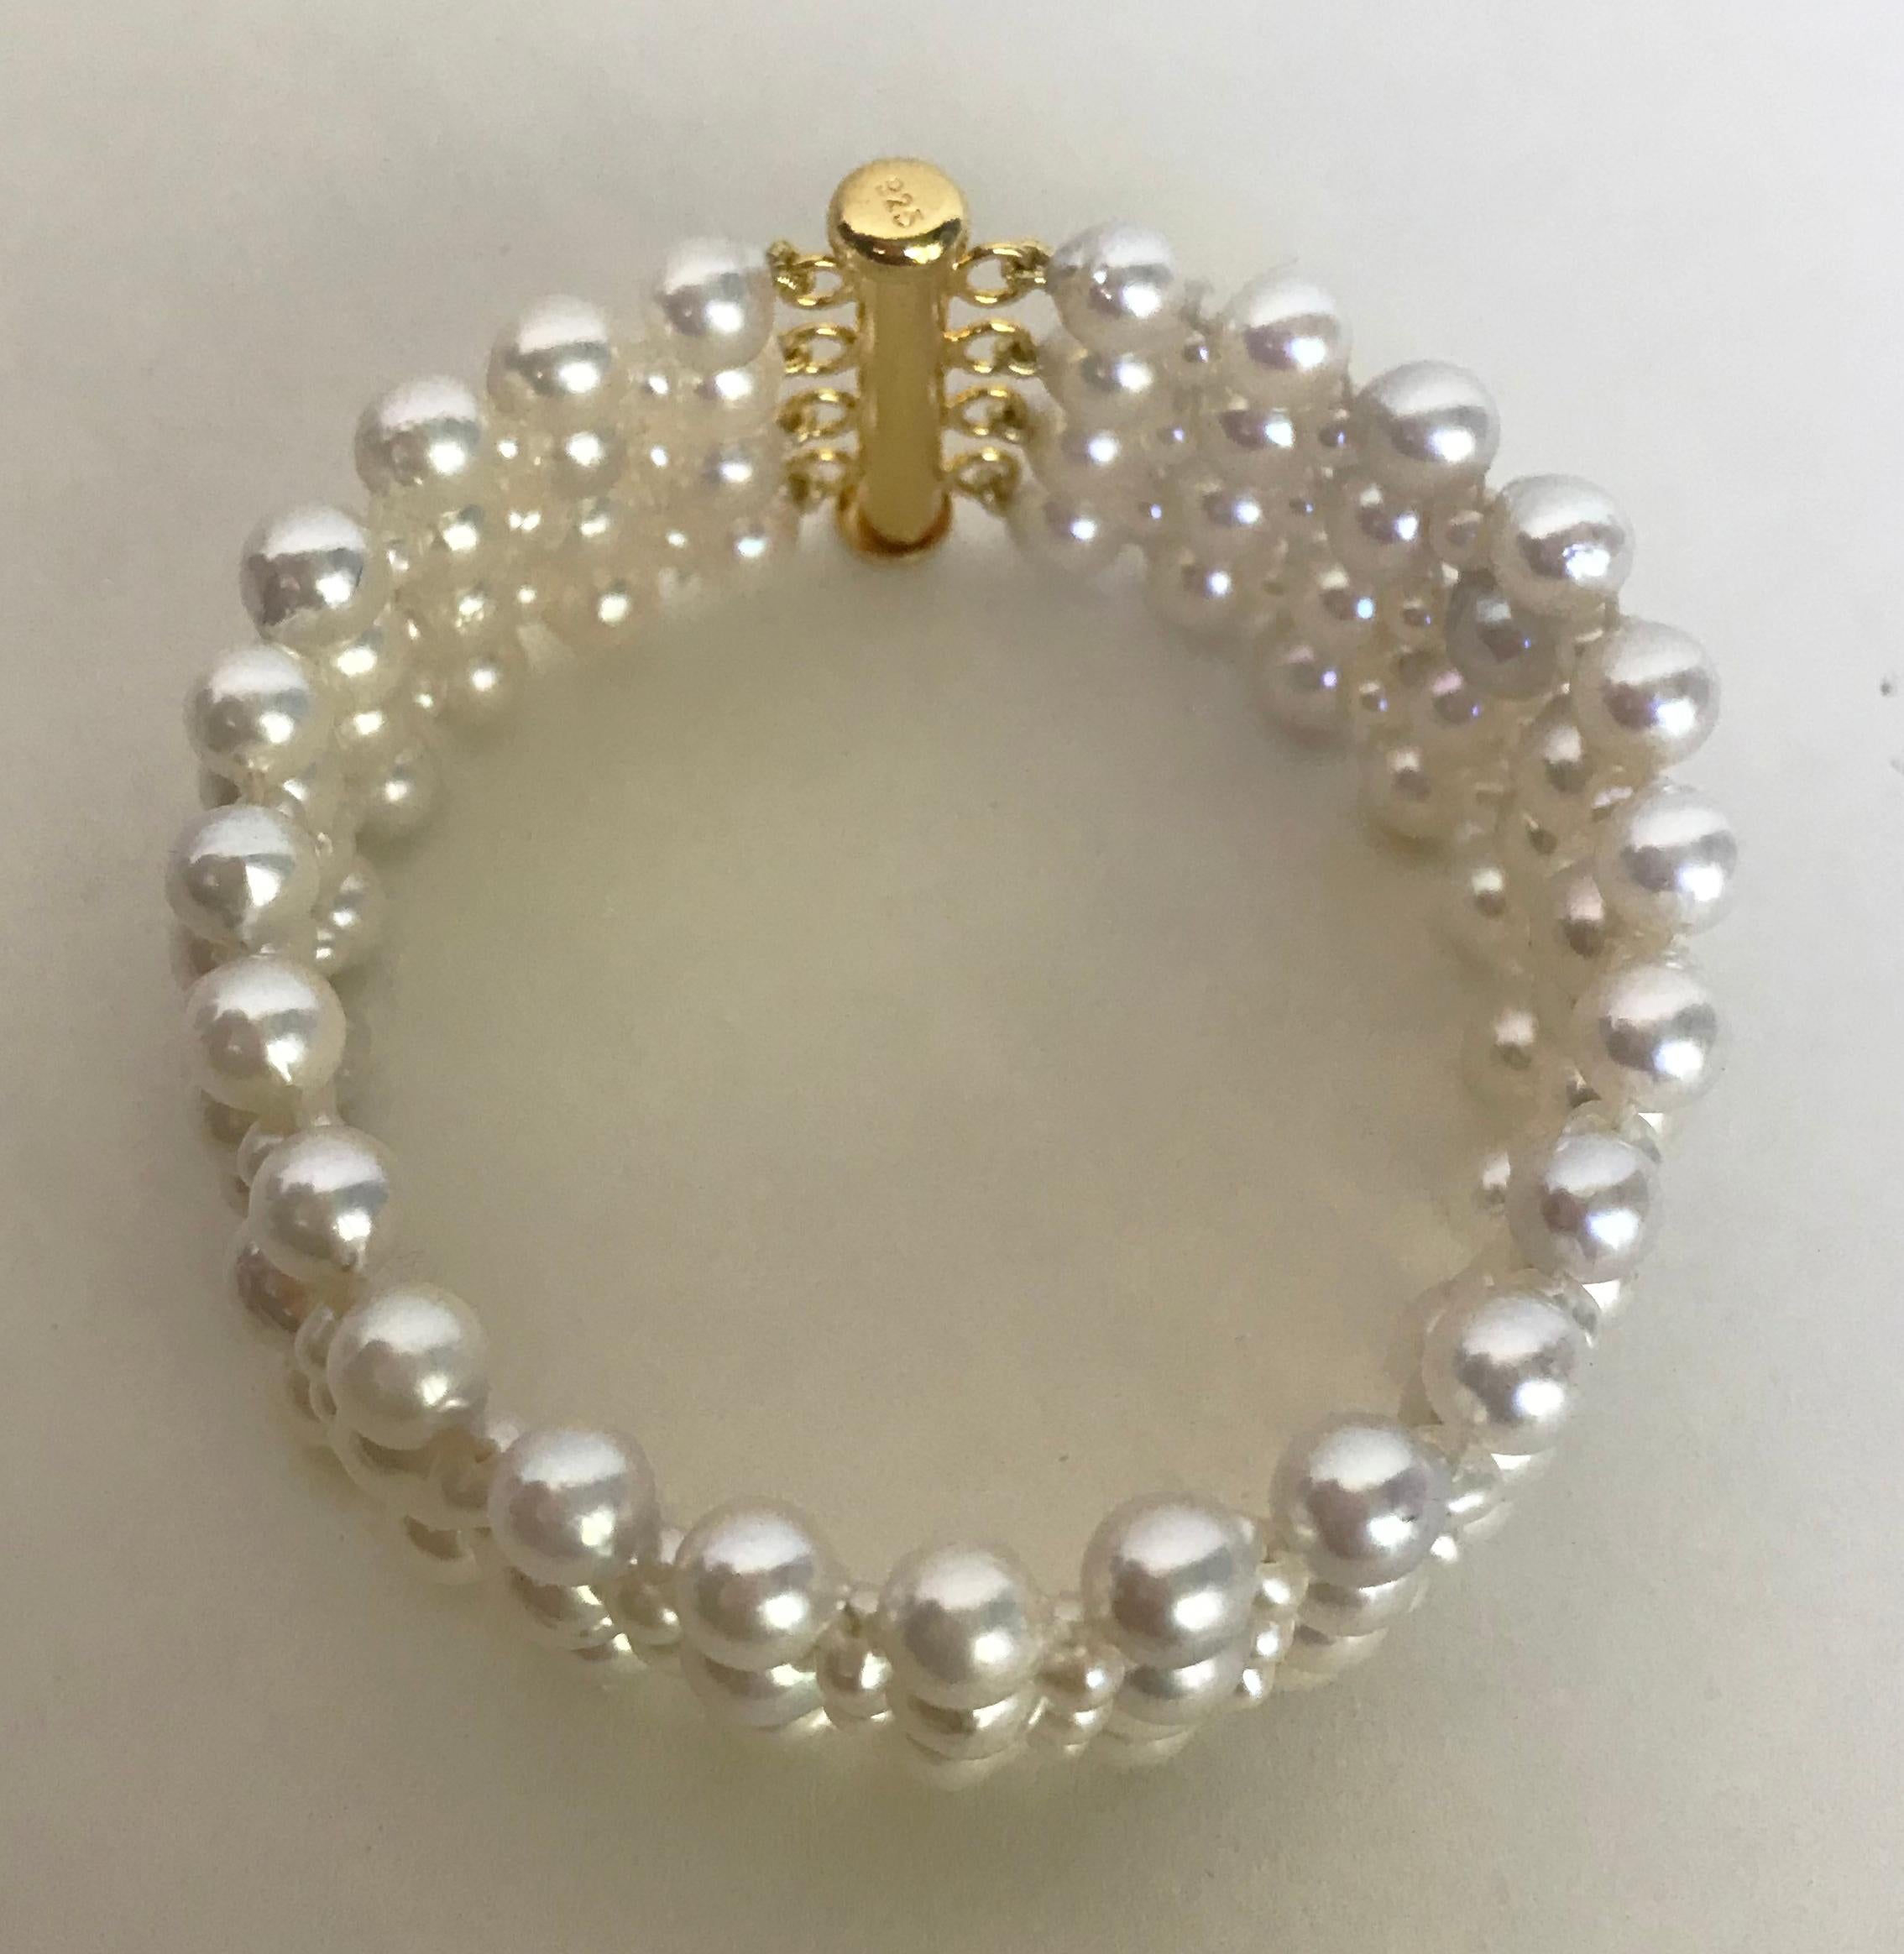 Bead Marina J. Woven Pearl Bracelet with 14 Karat Yellow Gold-Plated Clasp For Sale